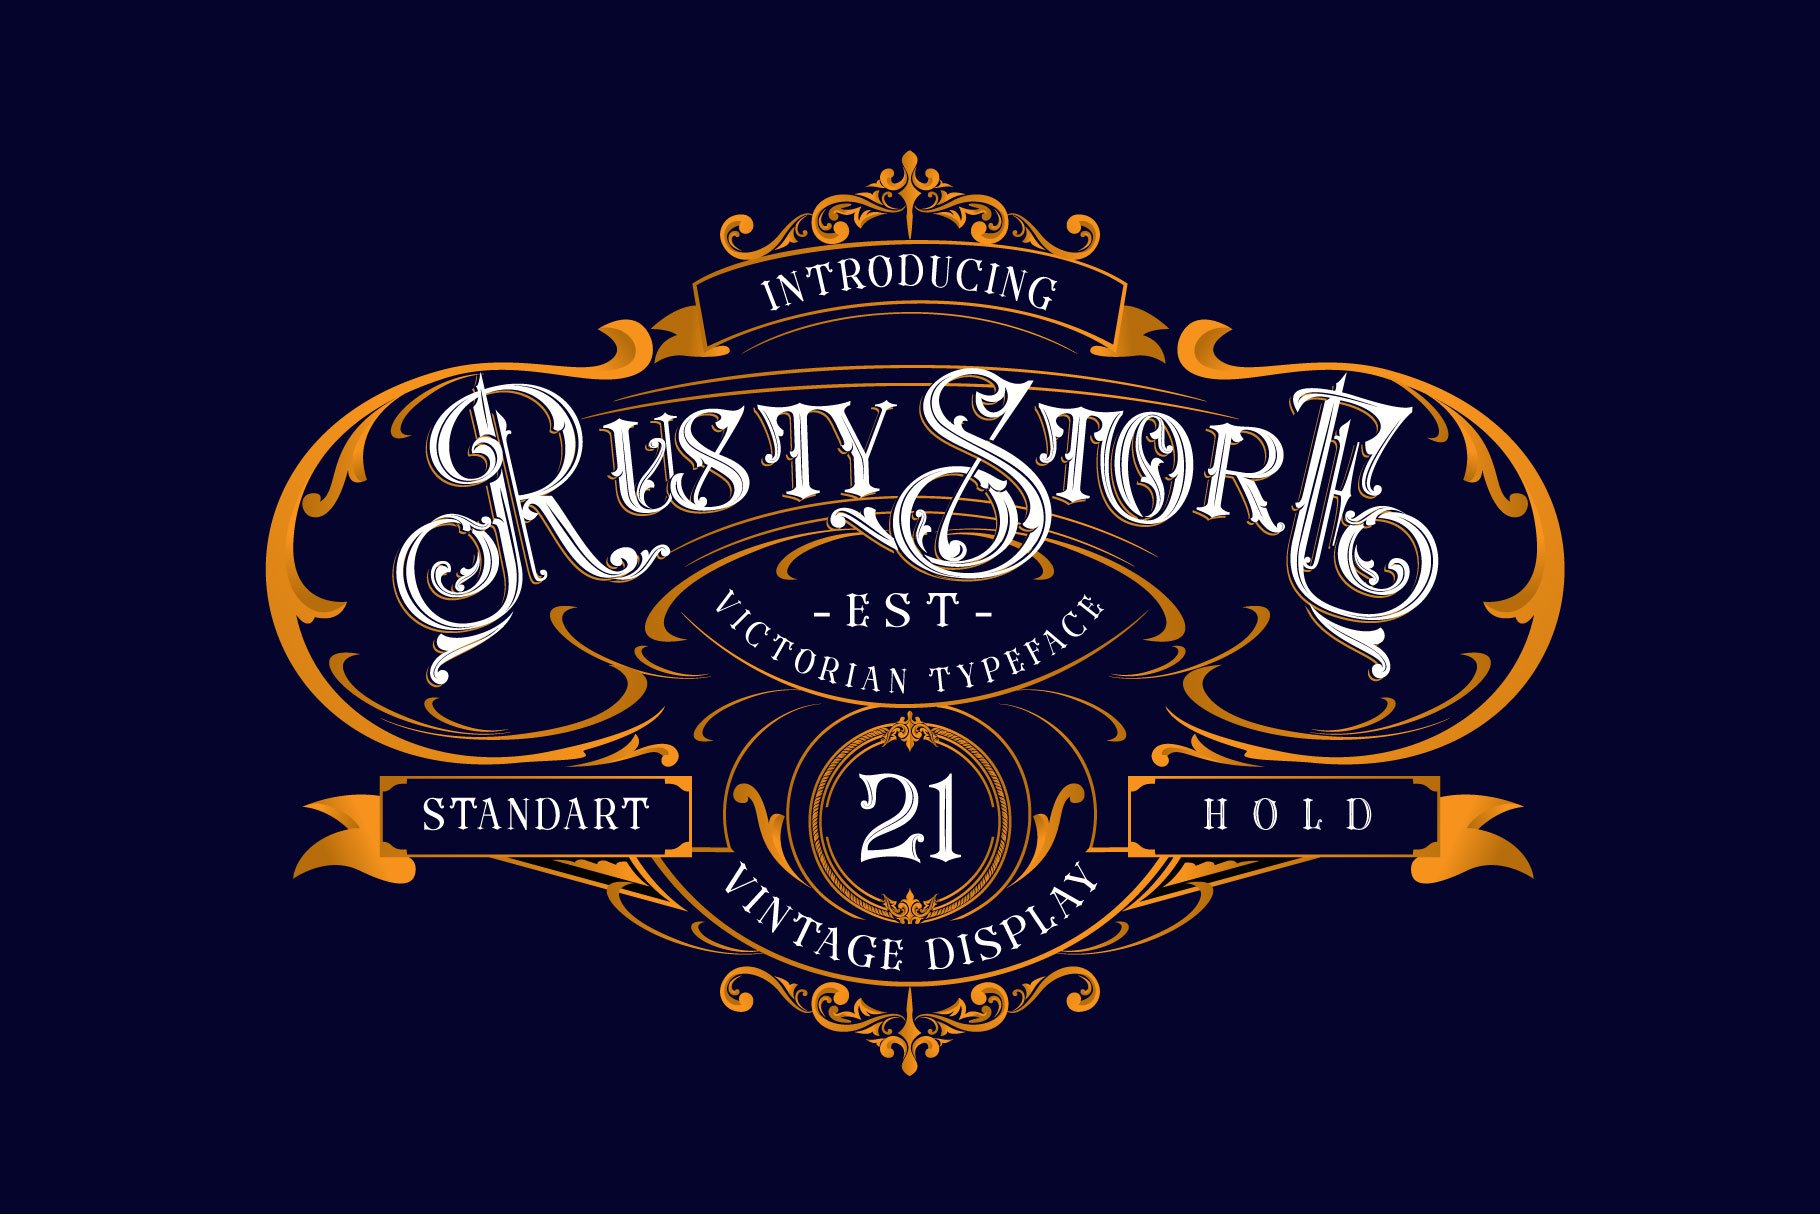 Rusty Store cover image.